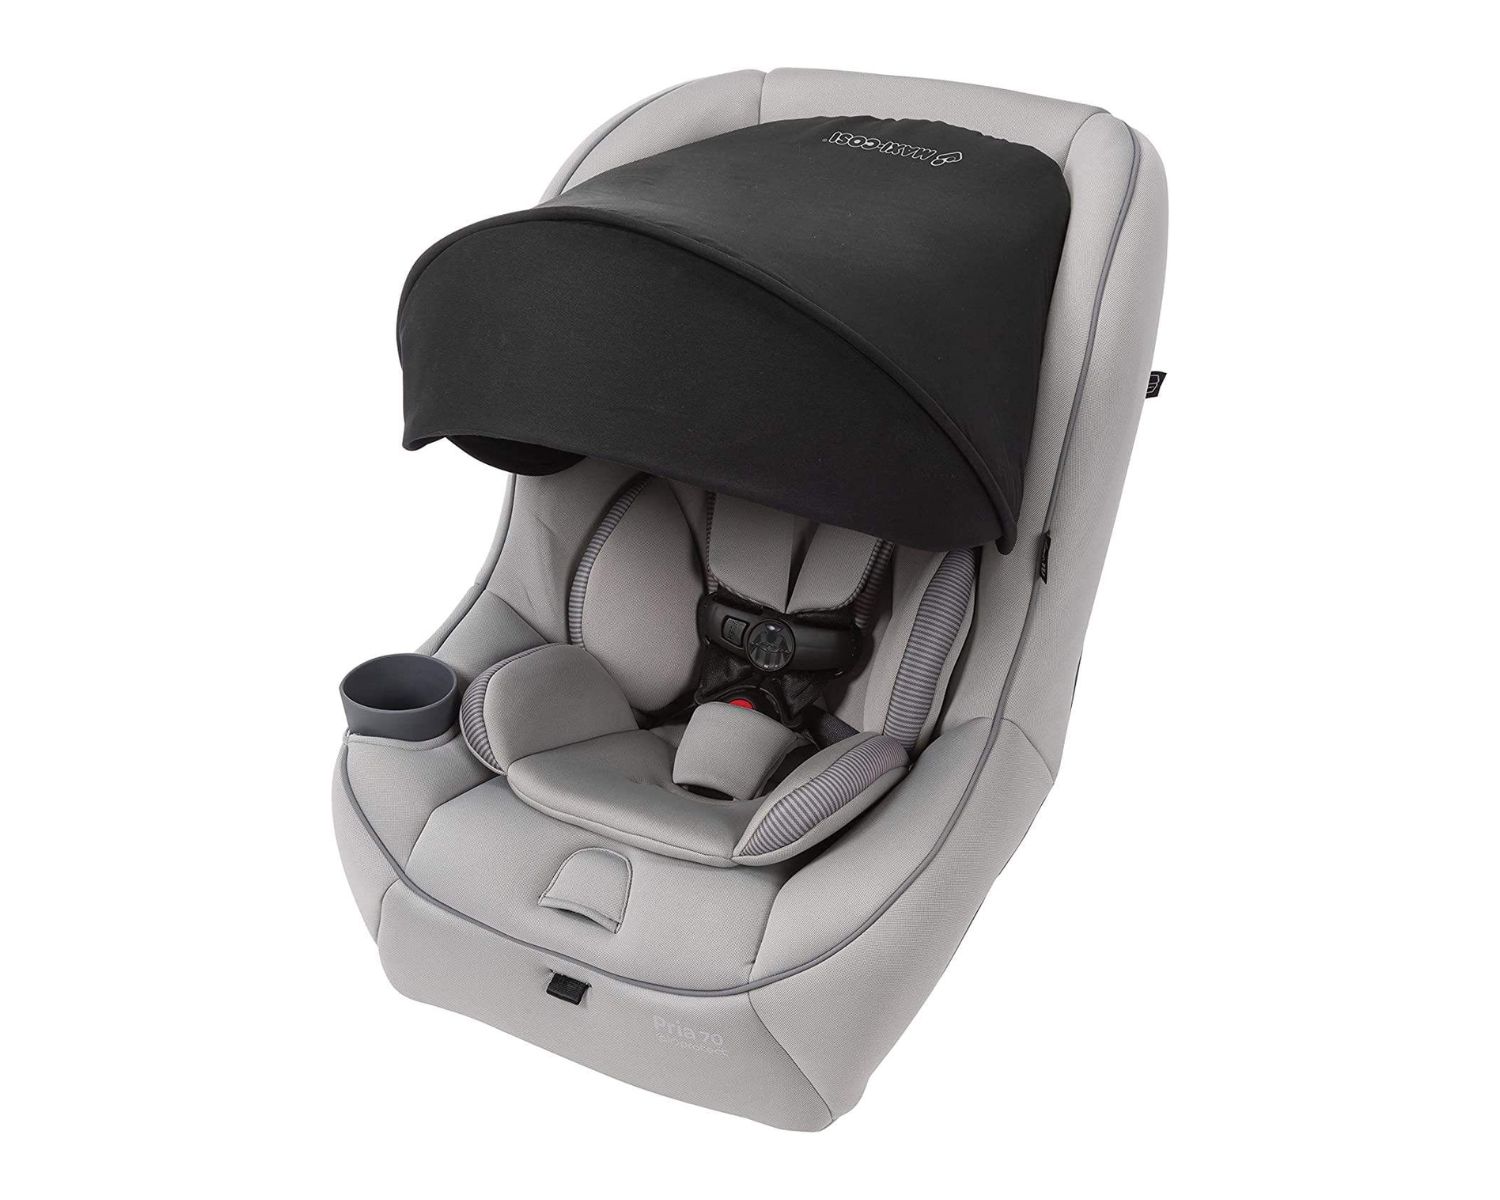 Car Seat Canopy Review: A Must-Have for Parents